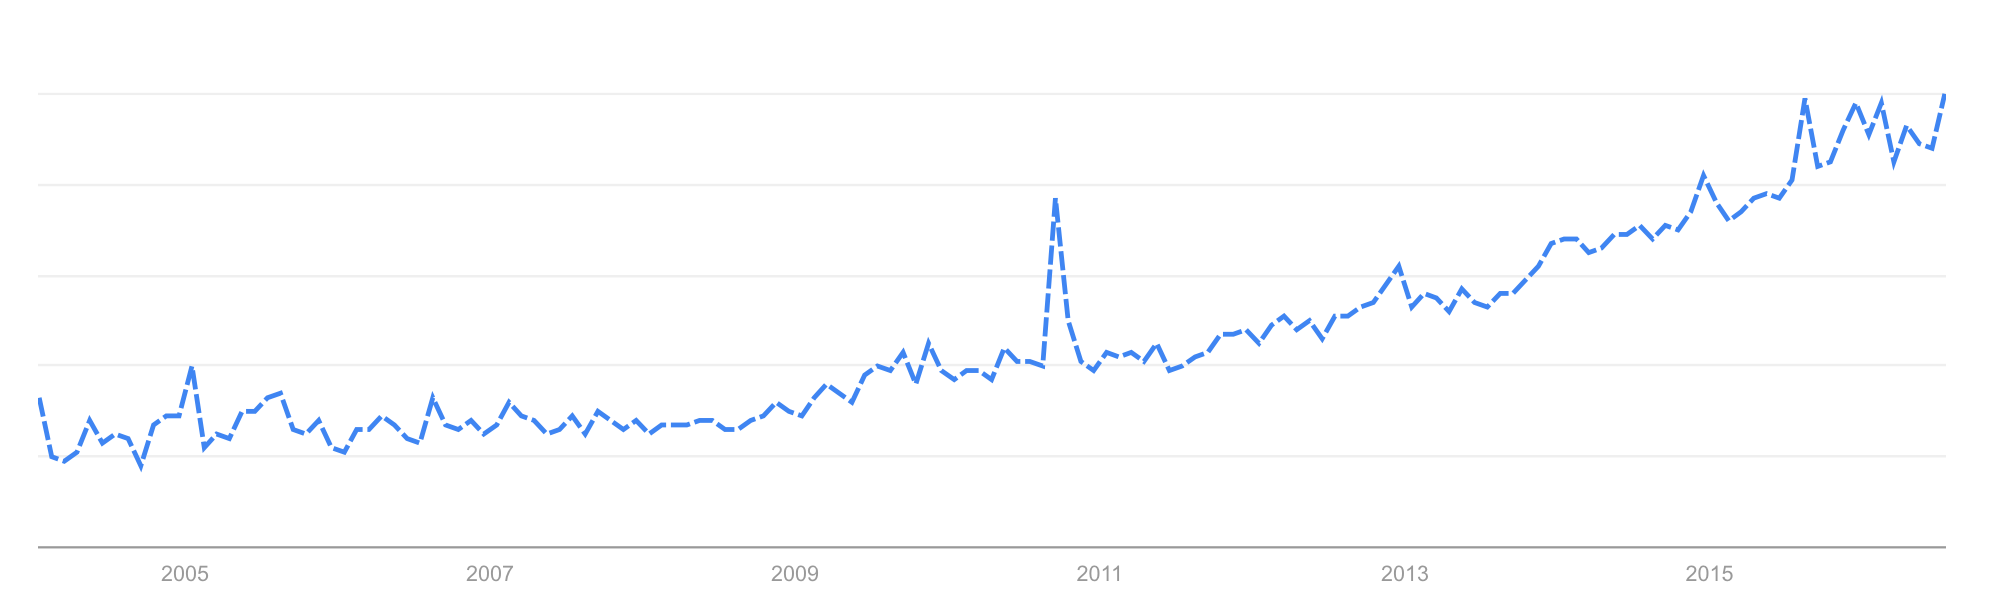 Overlapping circle grid © Google trends